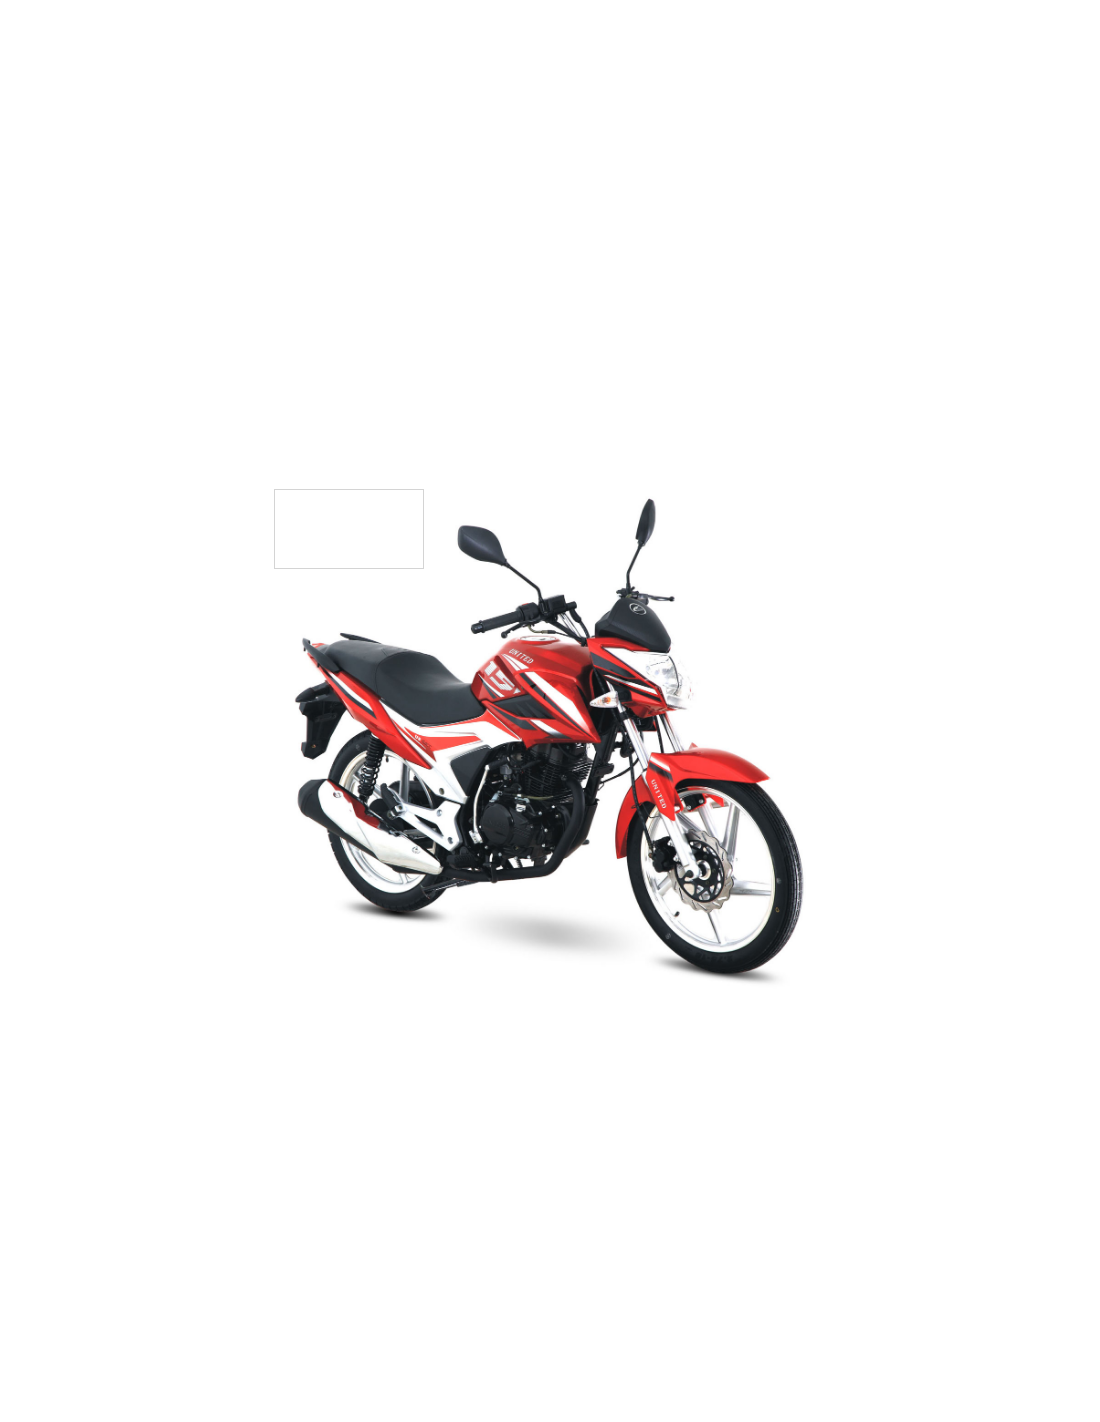 United Us125 Deluxe Price In Pakistan Specs Rating Reviews And